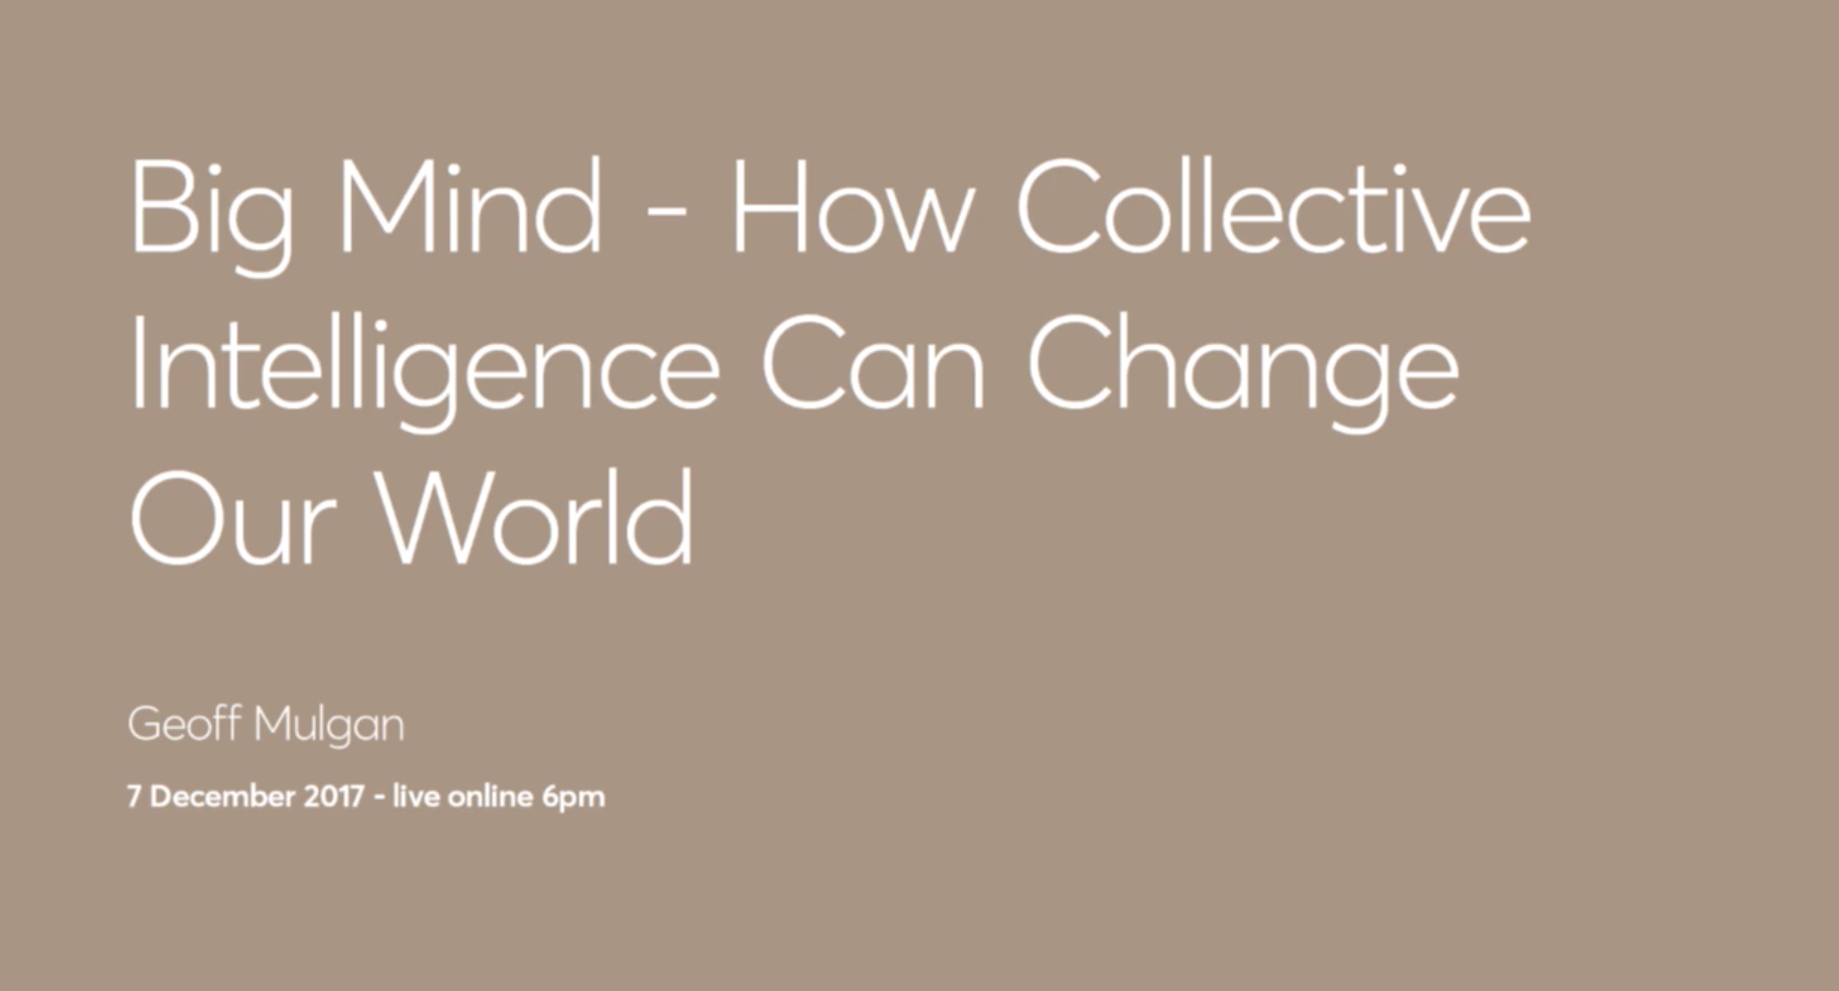 Thumbnail of video titled Big Mind - How collective intellige can change our world